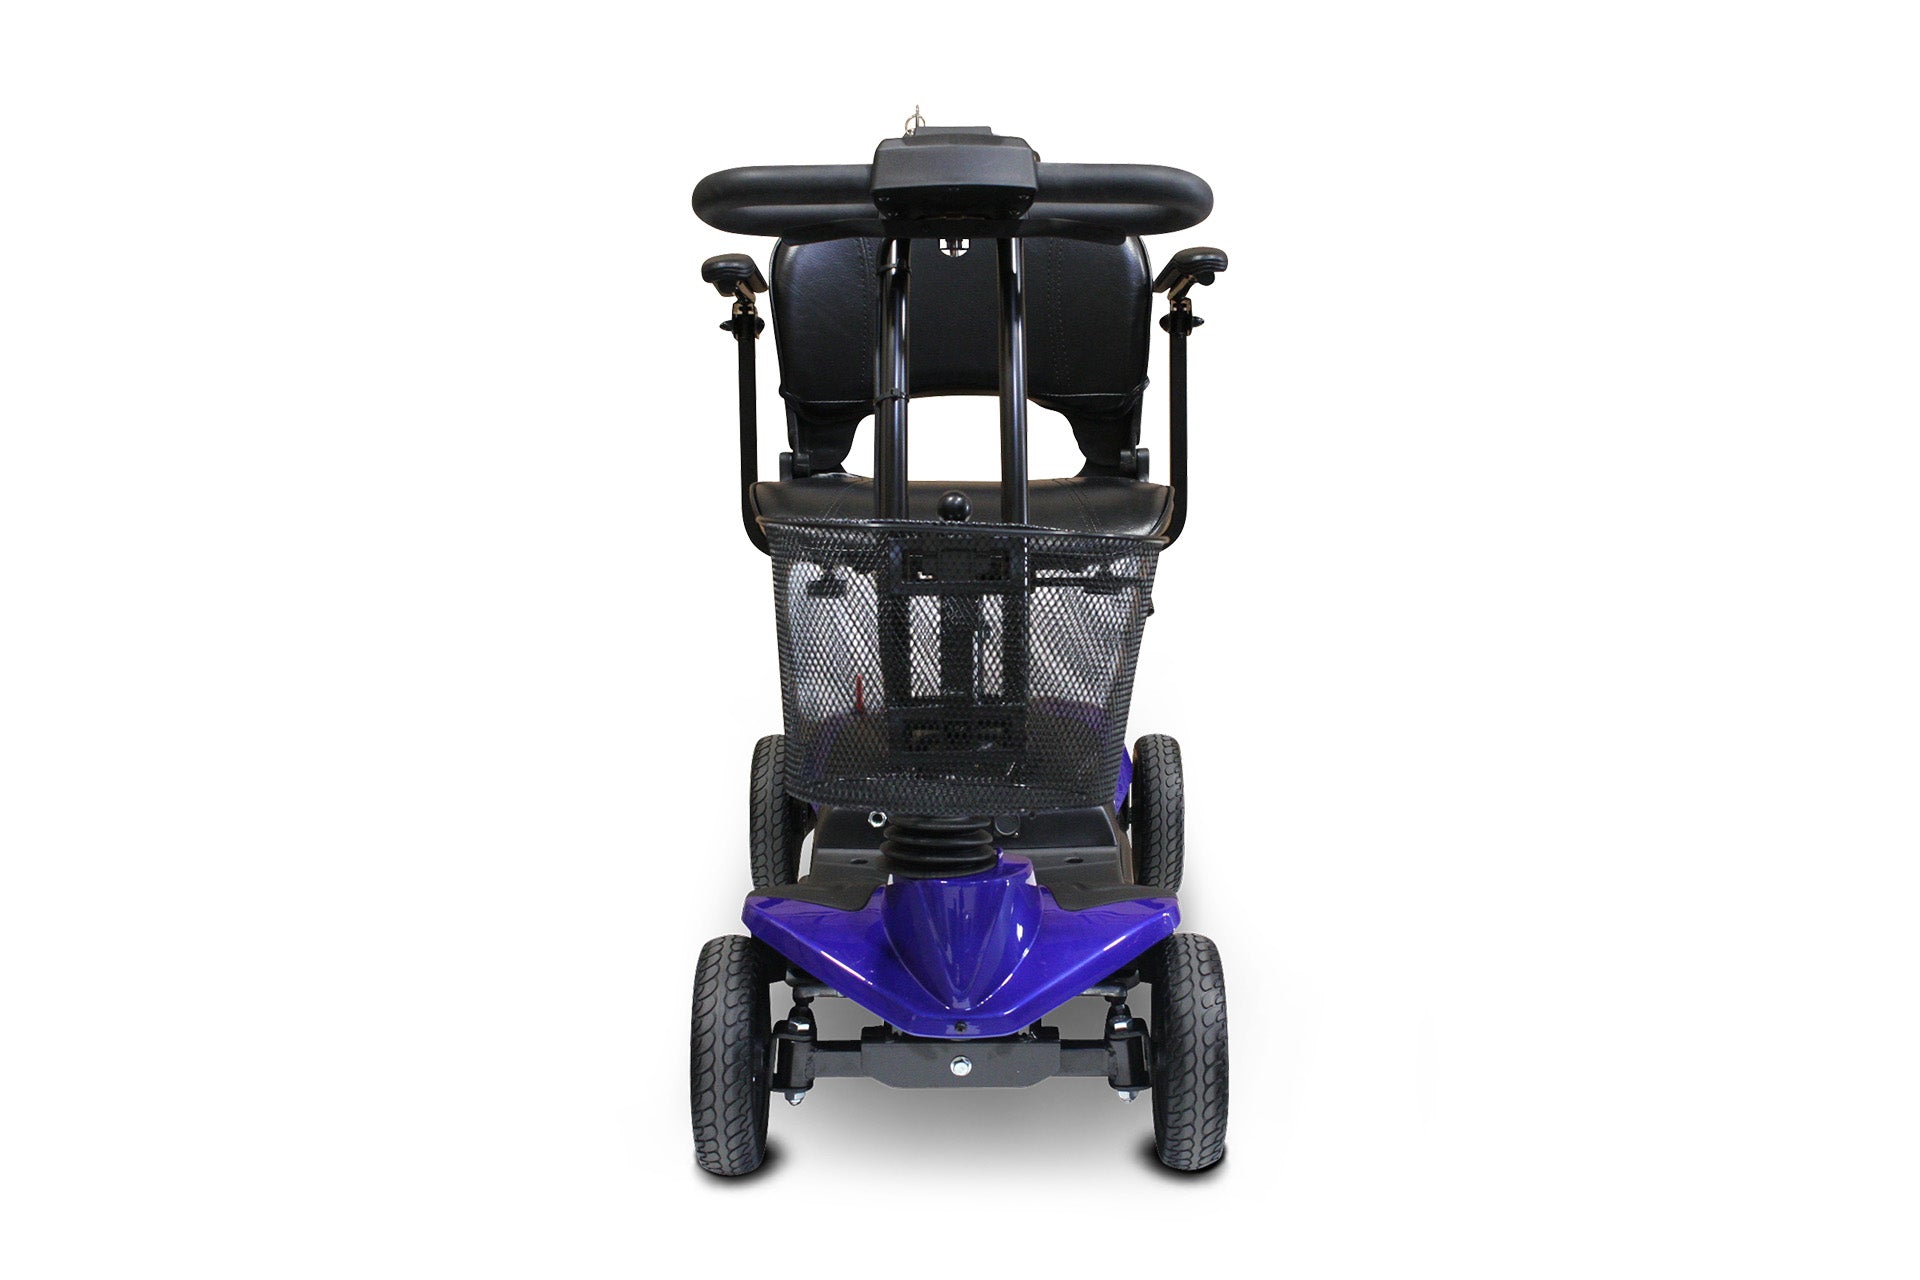 Ewheels Medical Lightweight 4 Wheel Portable Mobility Scooter - Blue